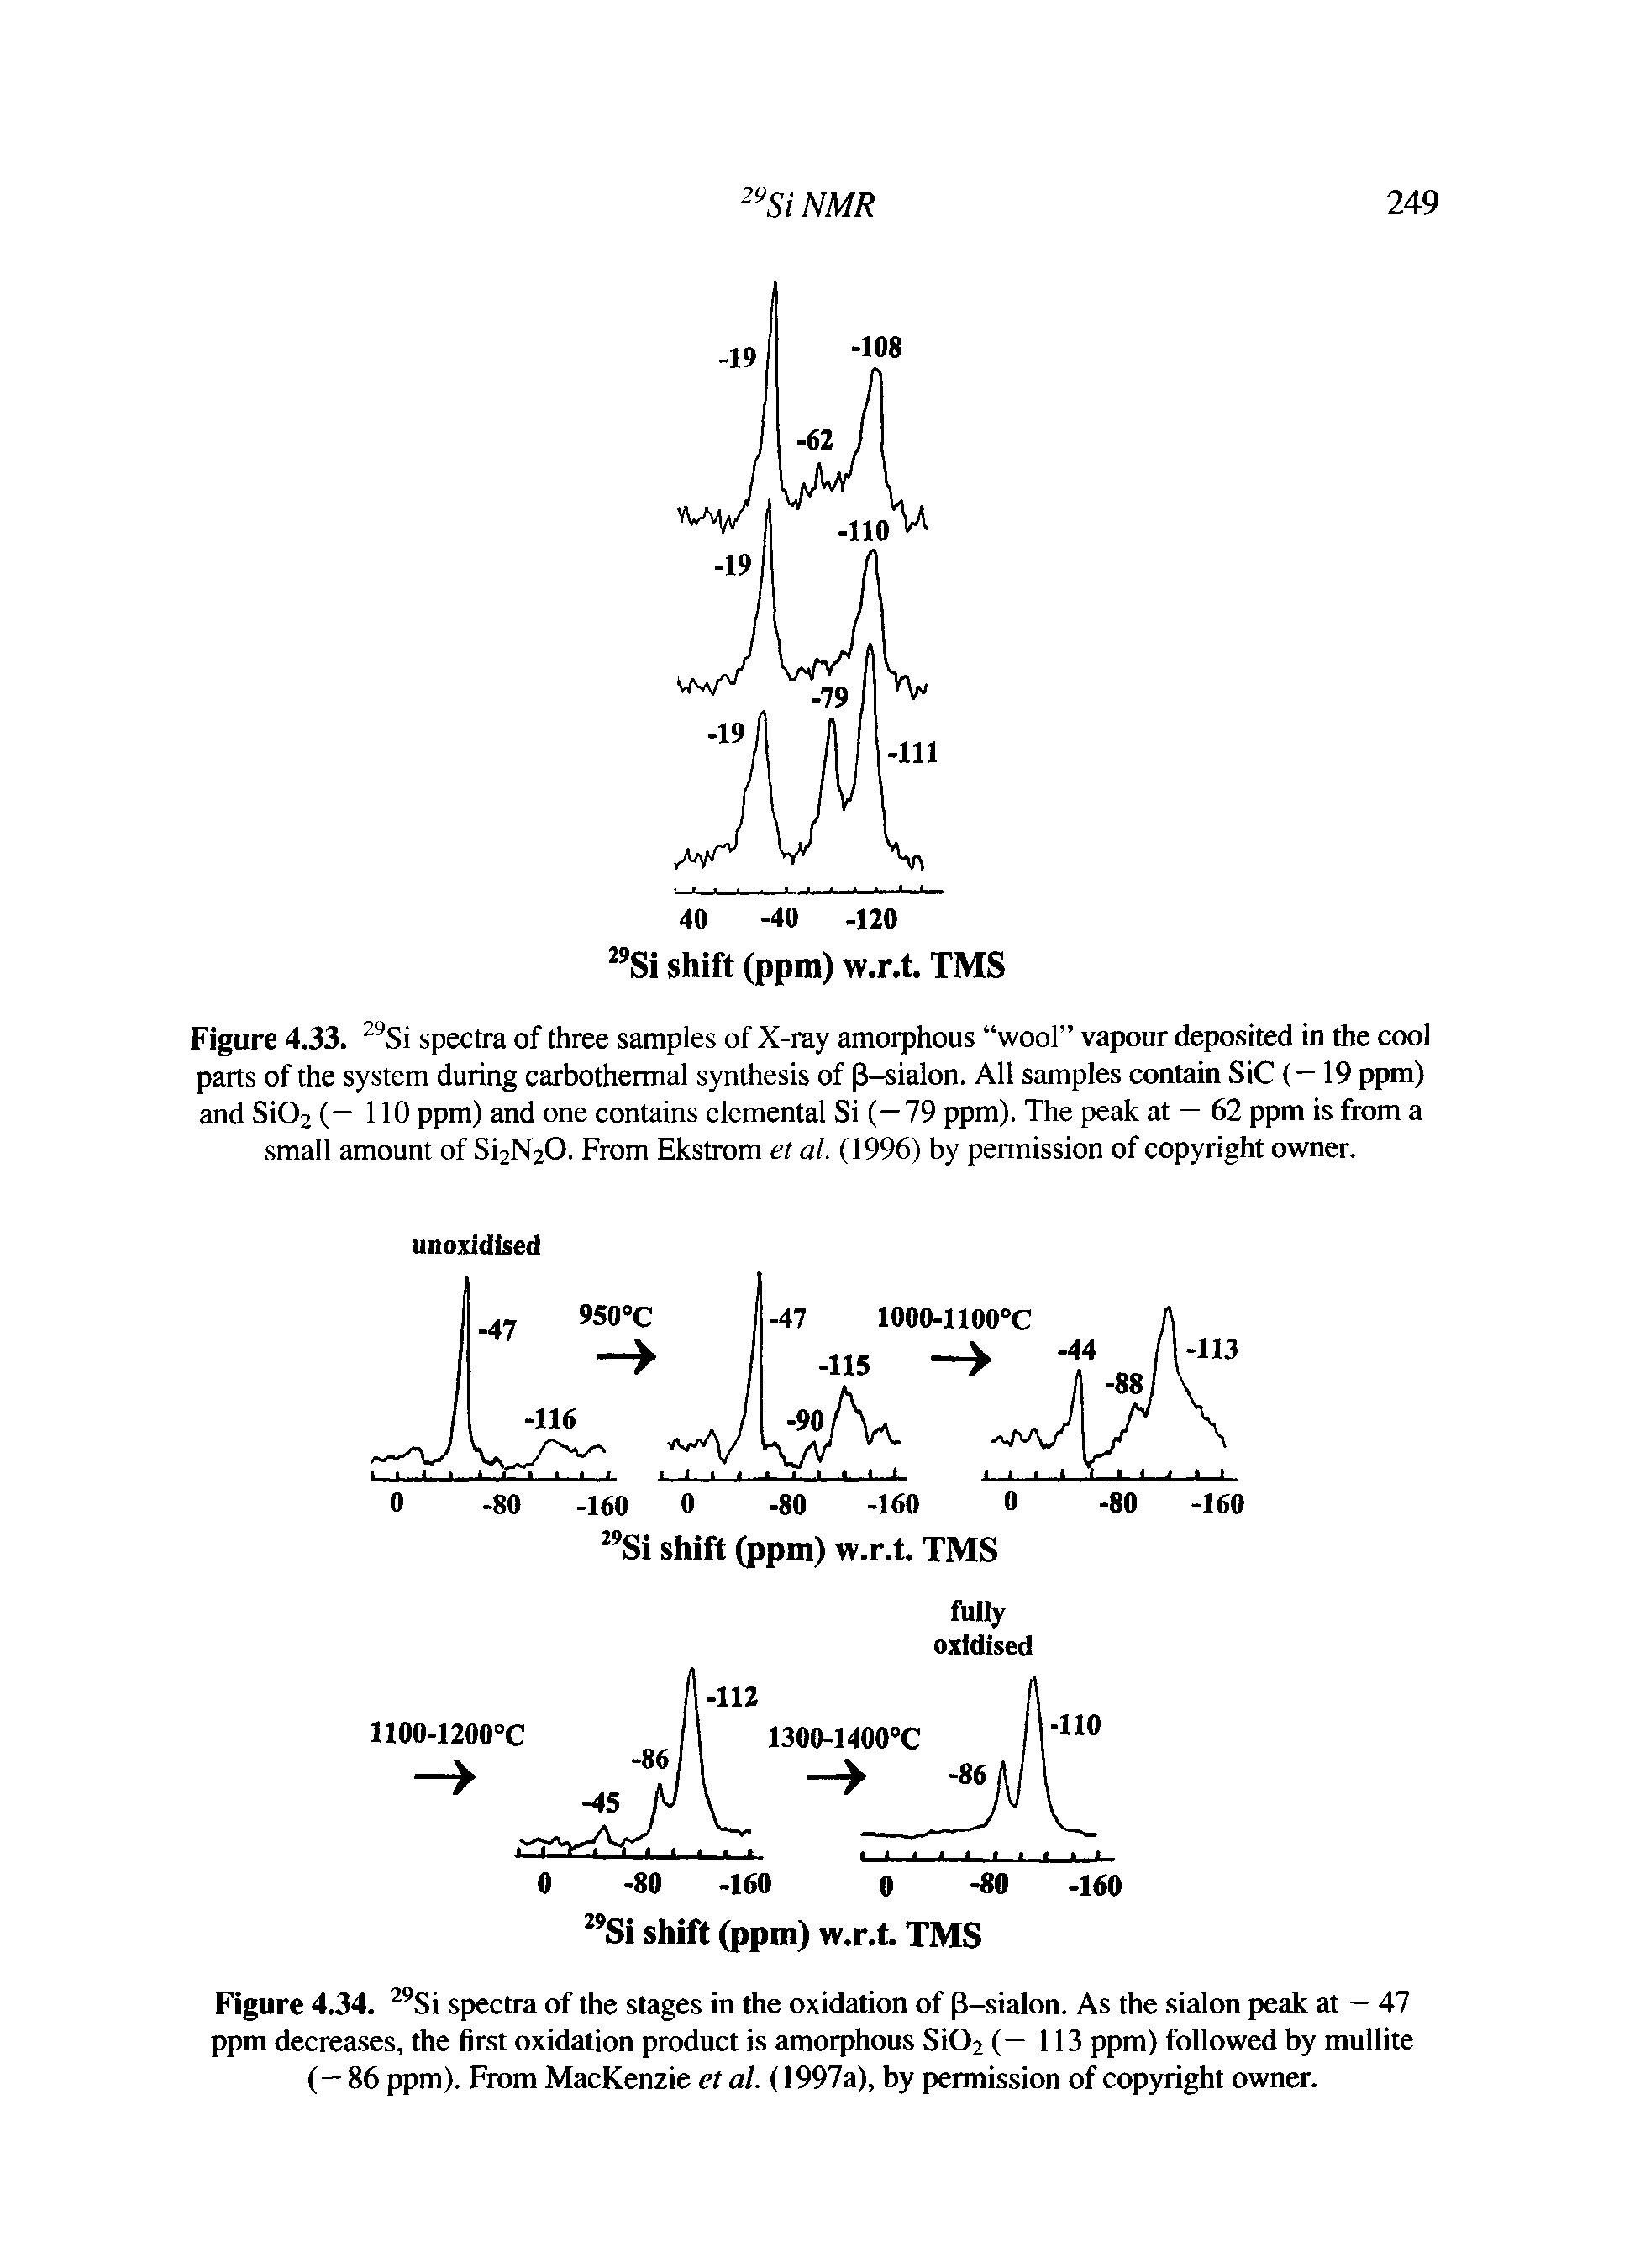 Figure 4.34. Si spectra of the stages in the oxidation of p-sialon. As the sialon peak at — 47 ppm decreases, the first oxidation product is amorphous Si02 (—113 ppm) followed by mullite (—86 ppm). From MacKenzie et al. (1997a), by permission of copyright owner.